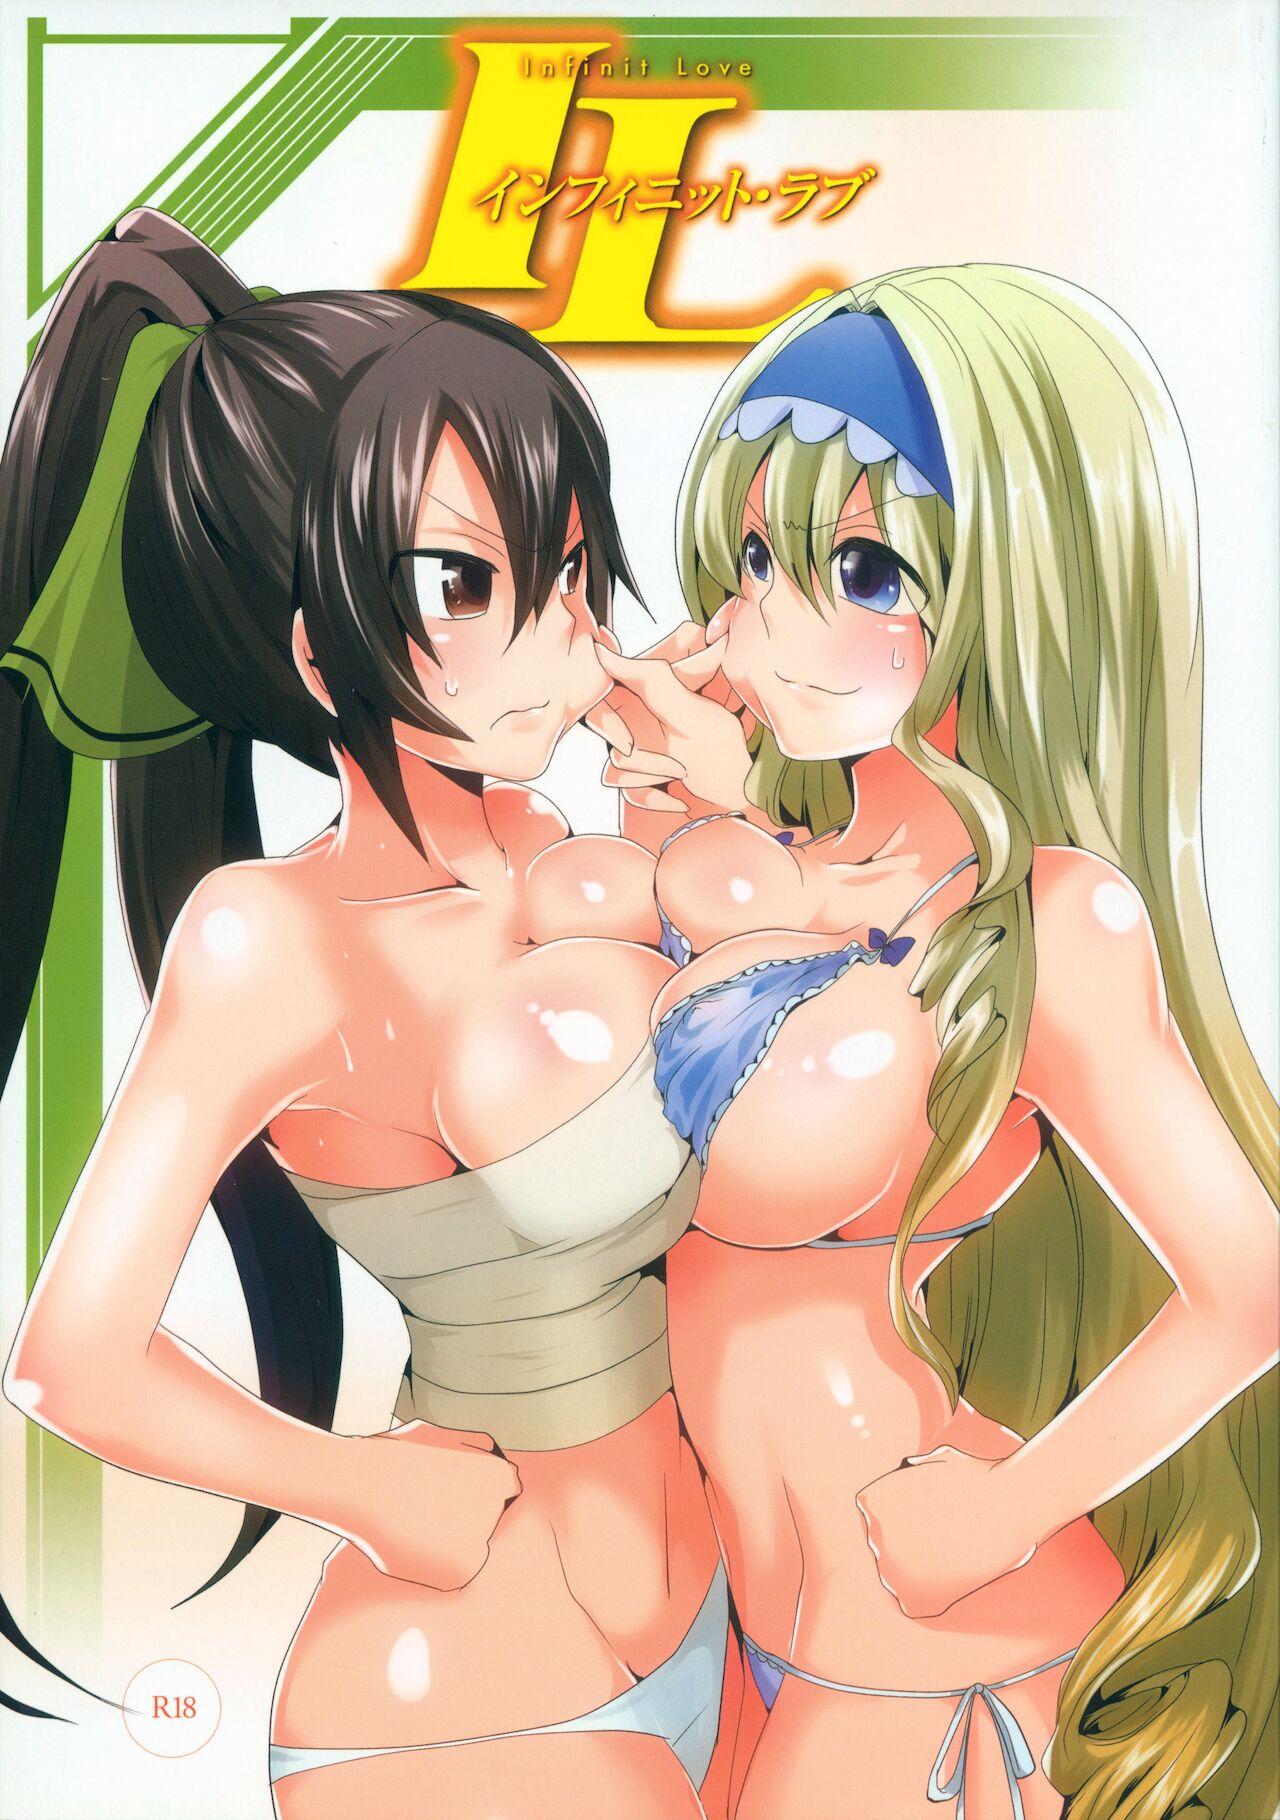 Strap On Infinit Love - Infinite stratos Les - Page 1